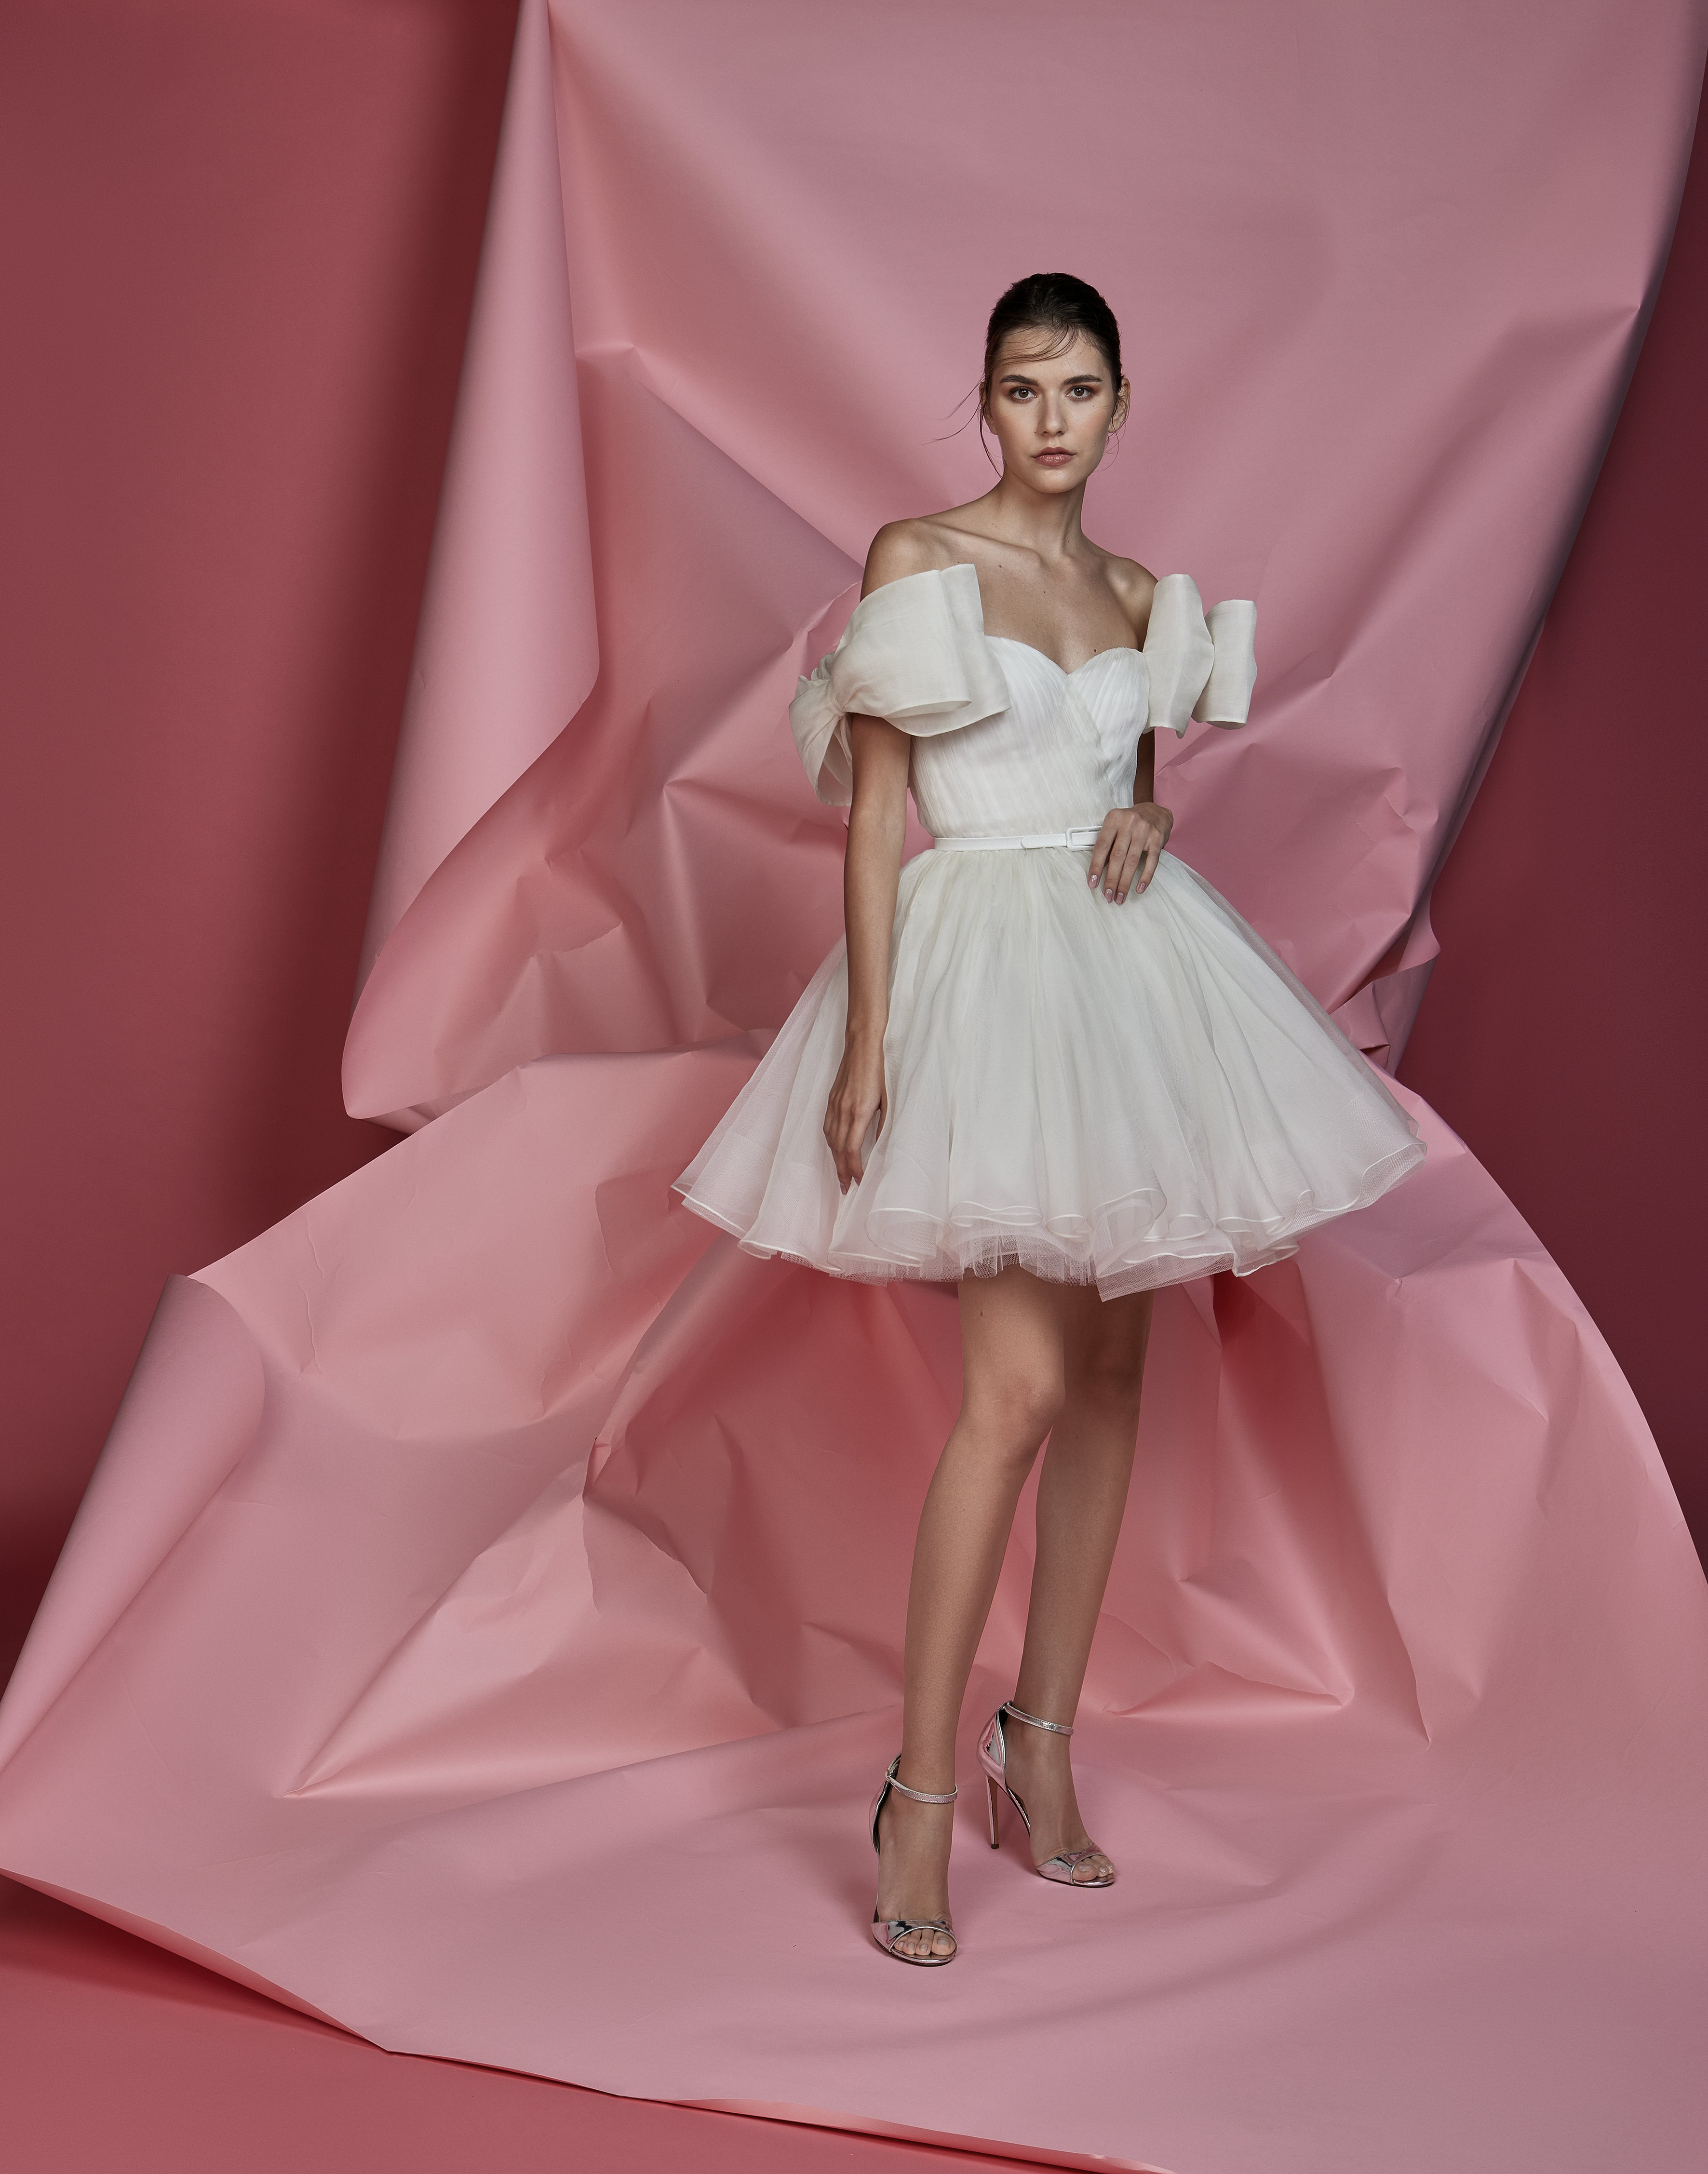 Spring 2023 Wedding Dress Trends Include Tutu Skirts, Sequins, & More